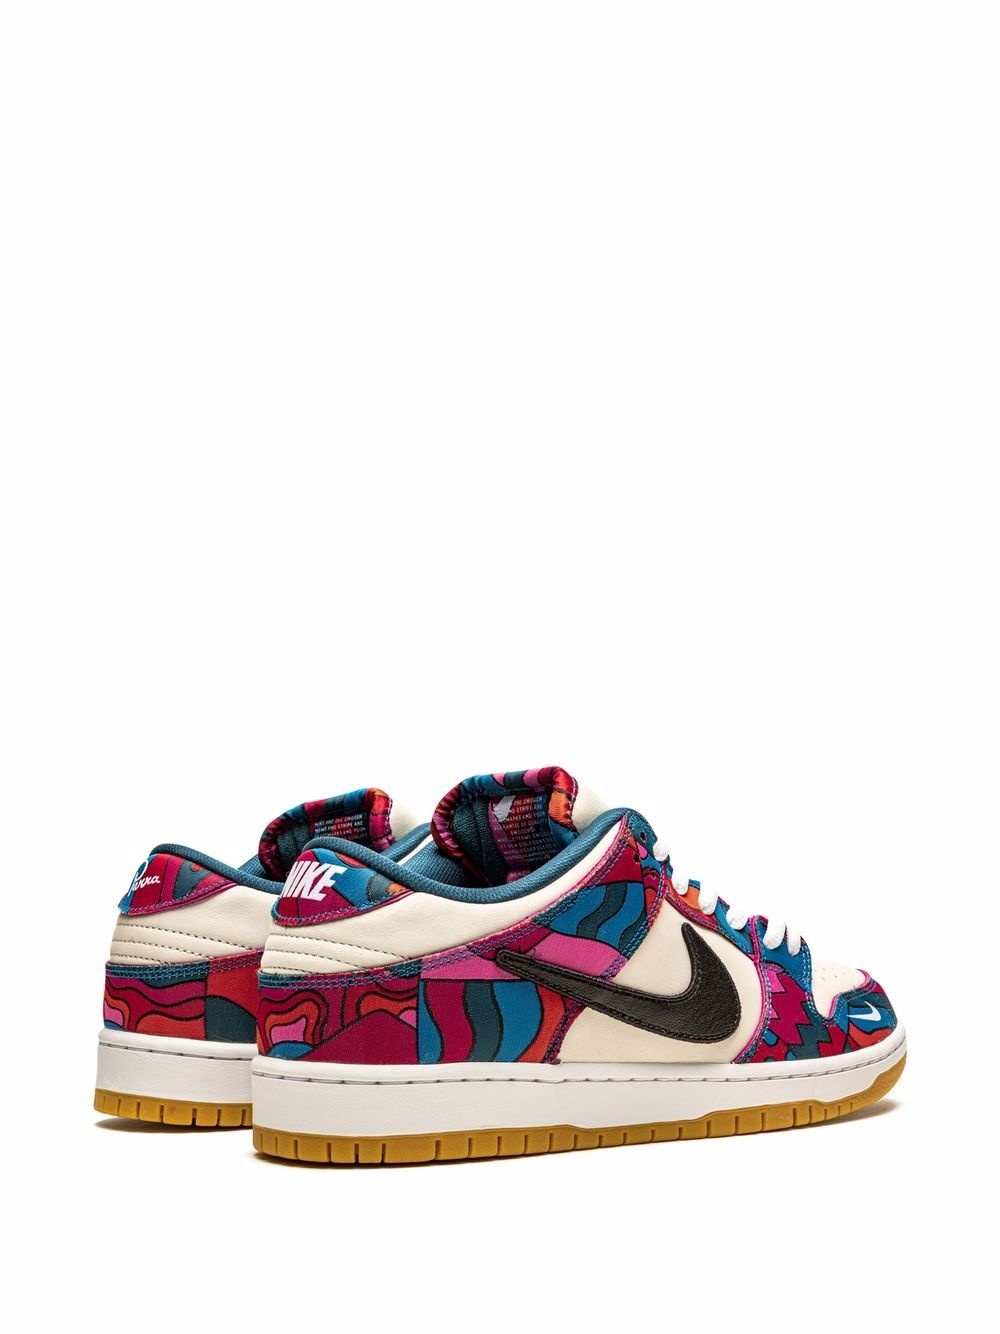 x Parra Dunk Low SB "Abstract Art" sneakers - 3